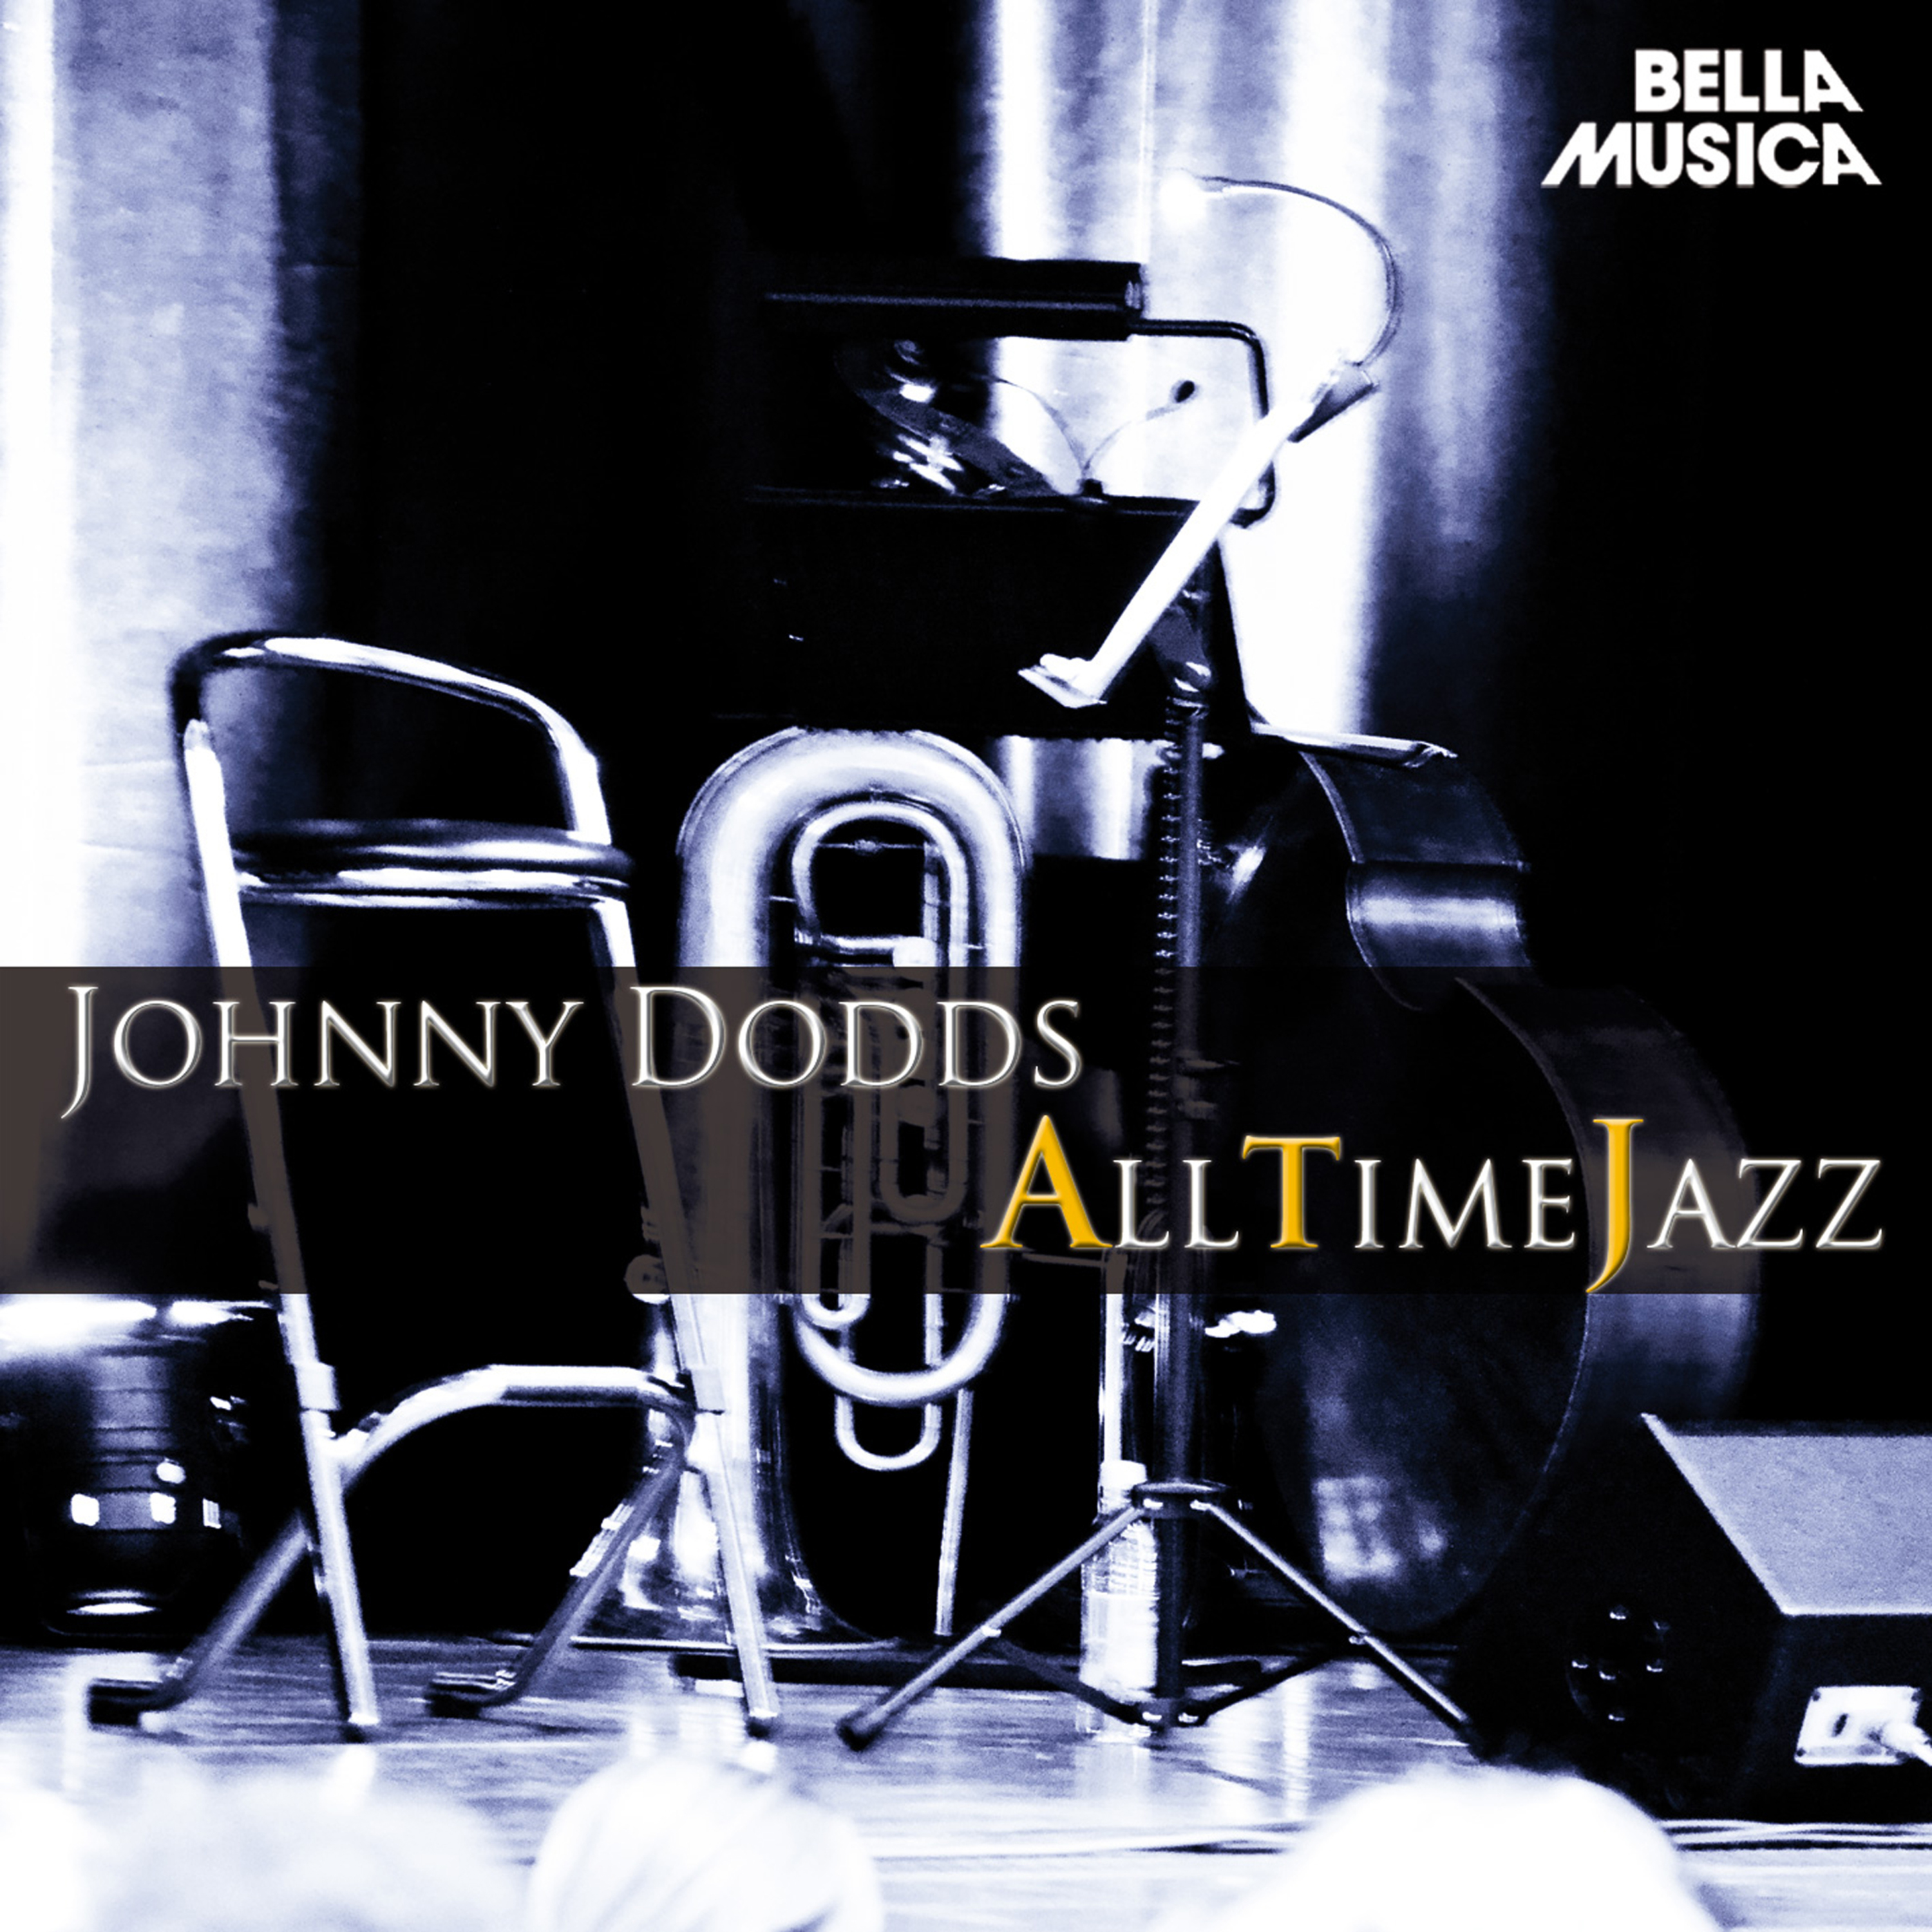 All Time Jazz: Johnny Dodds